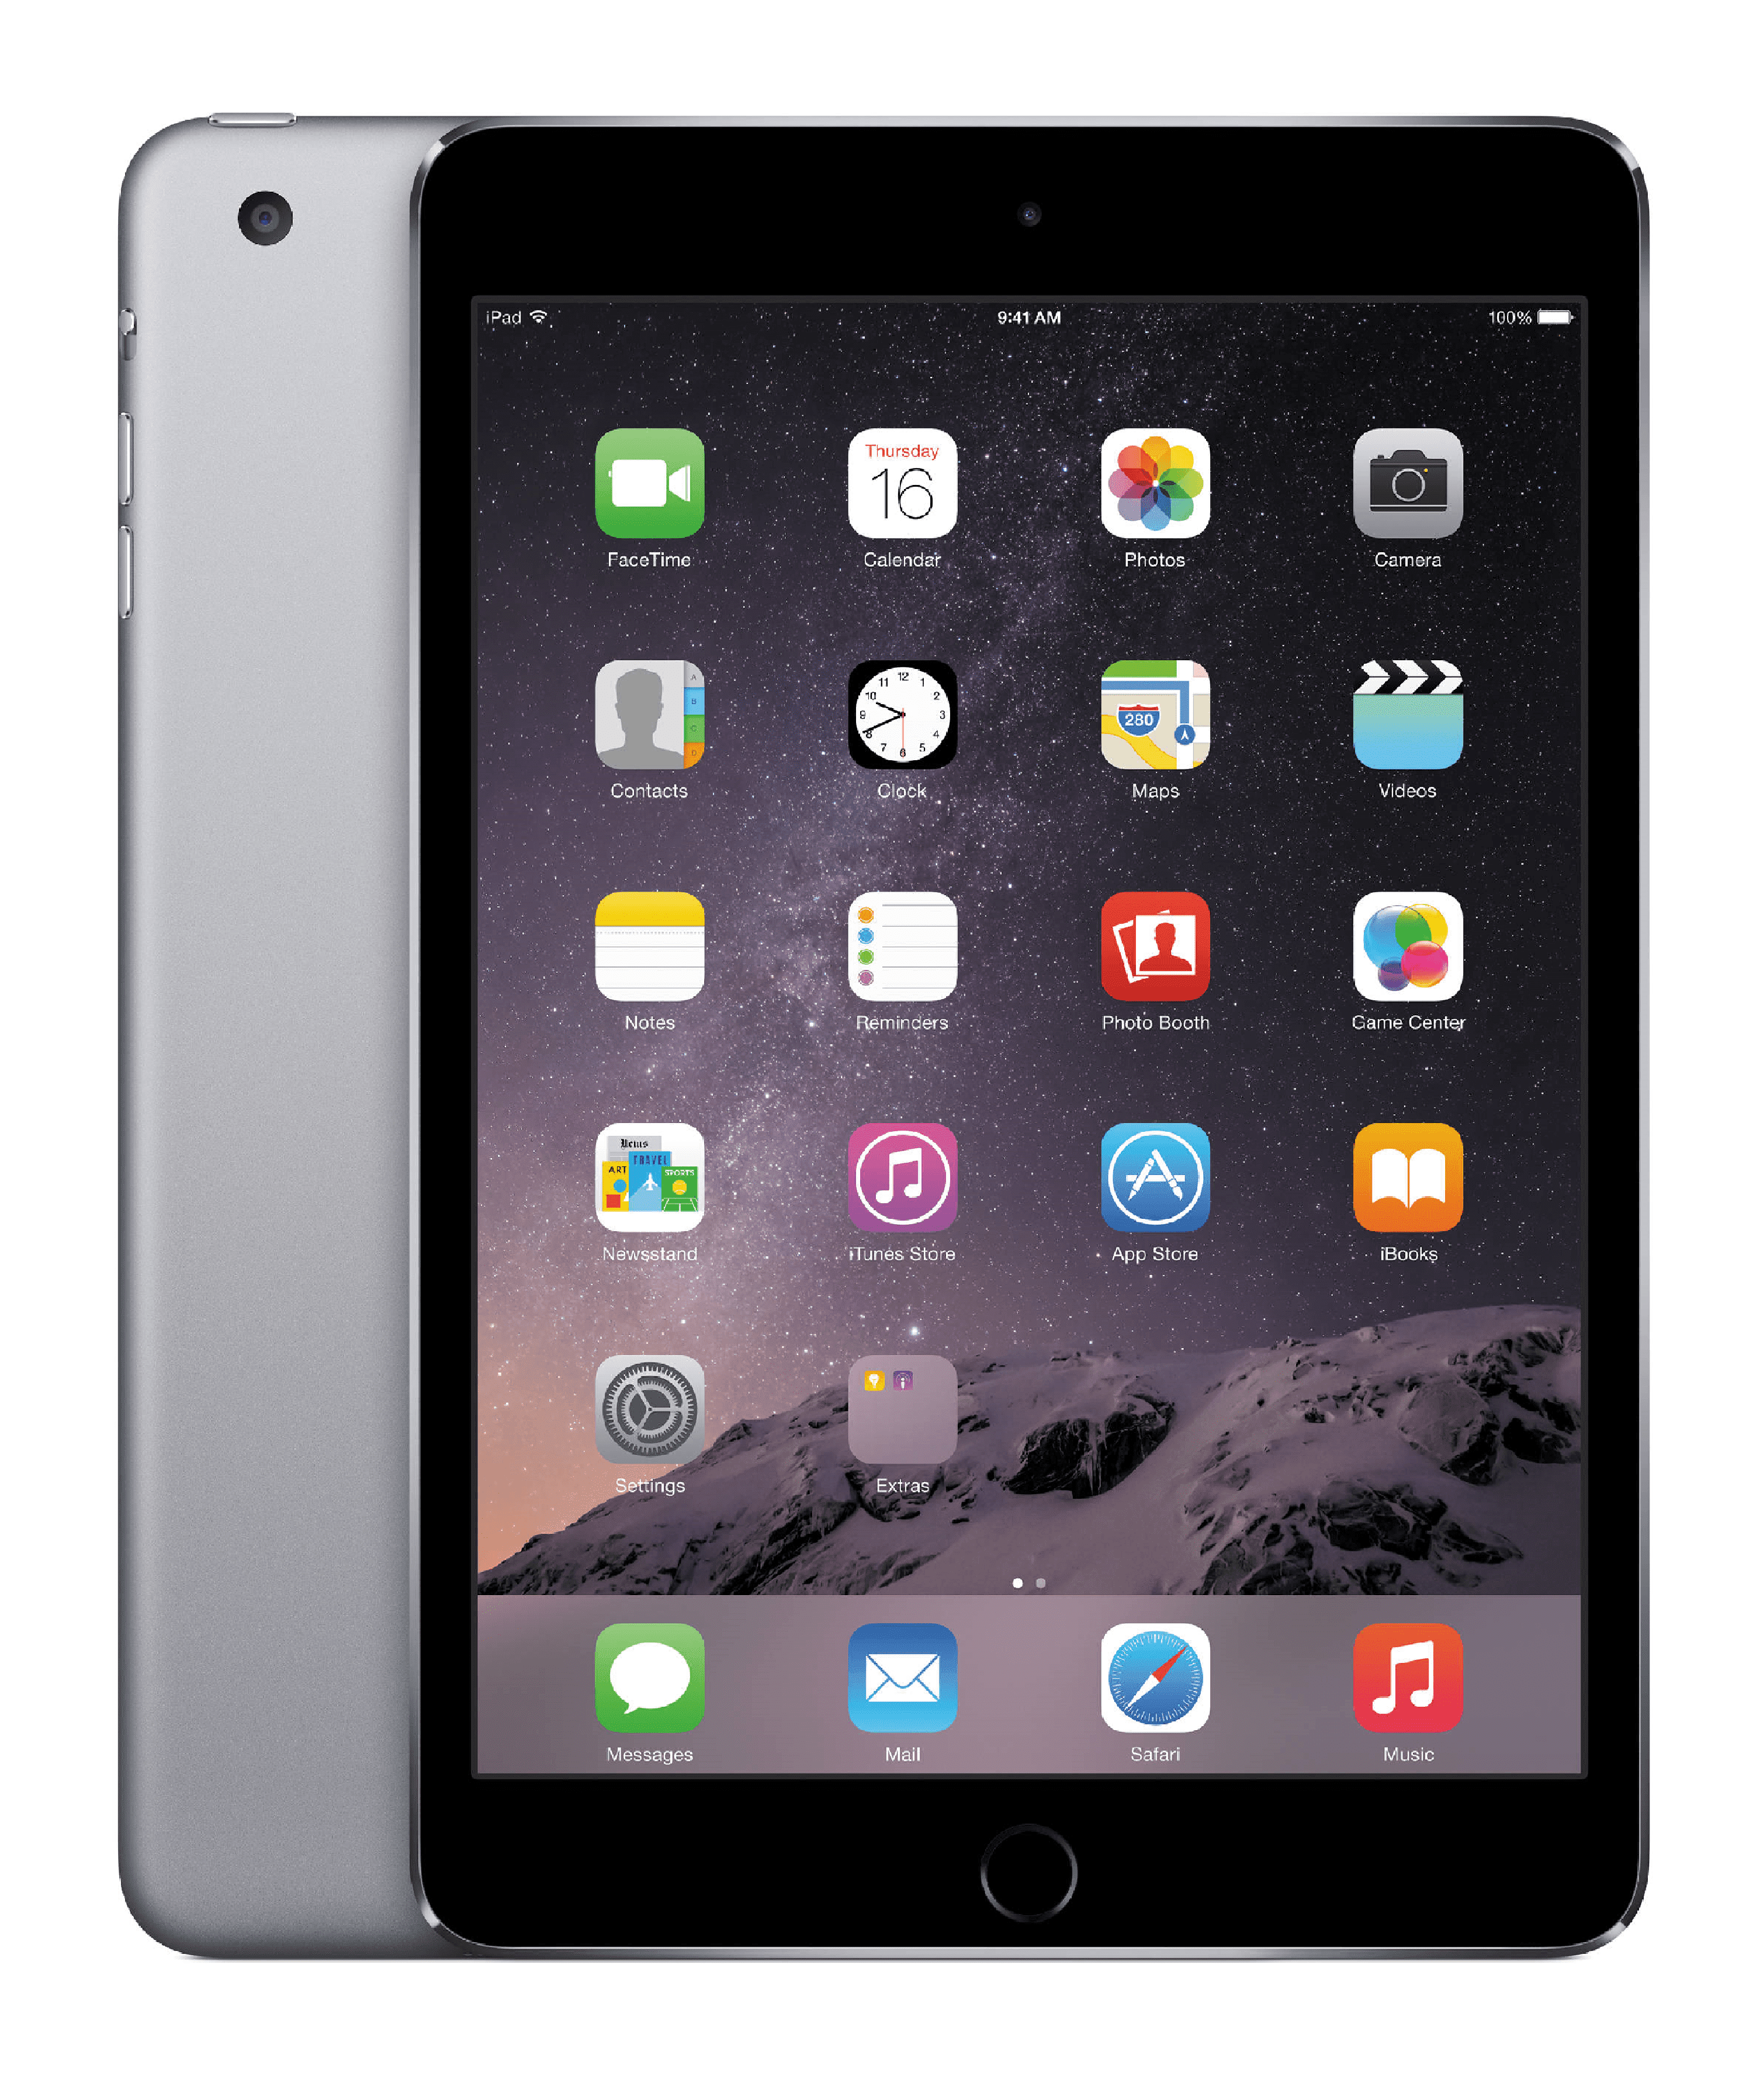 Apple iPad Mini 2: An In-Depth Review of the Compact Tablet